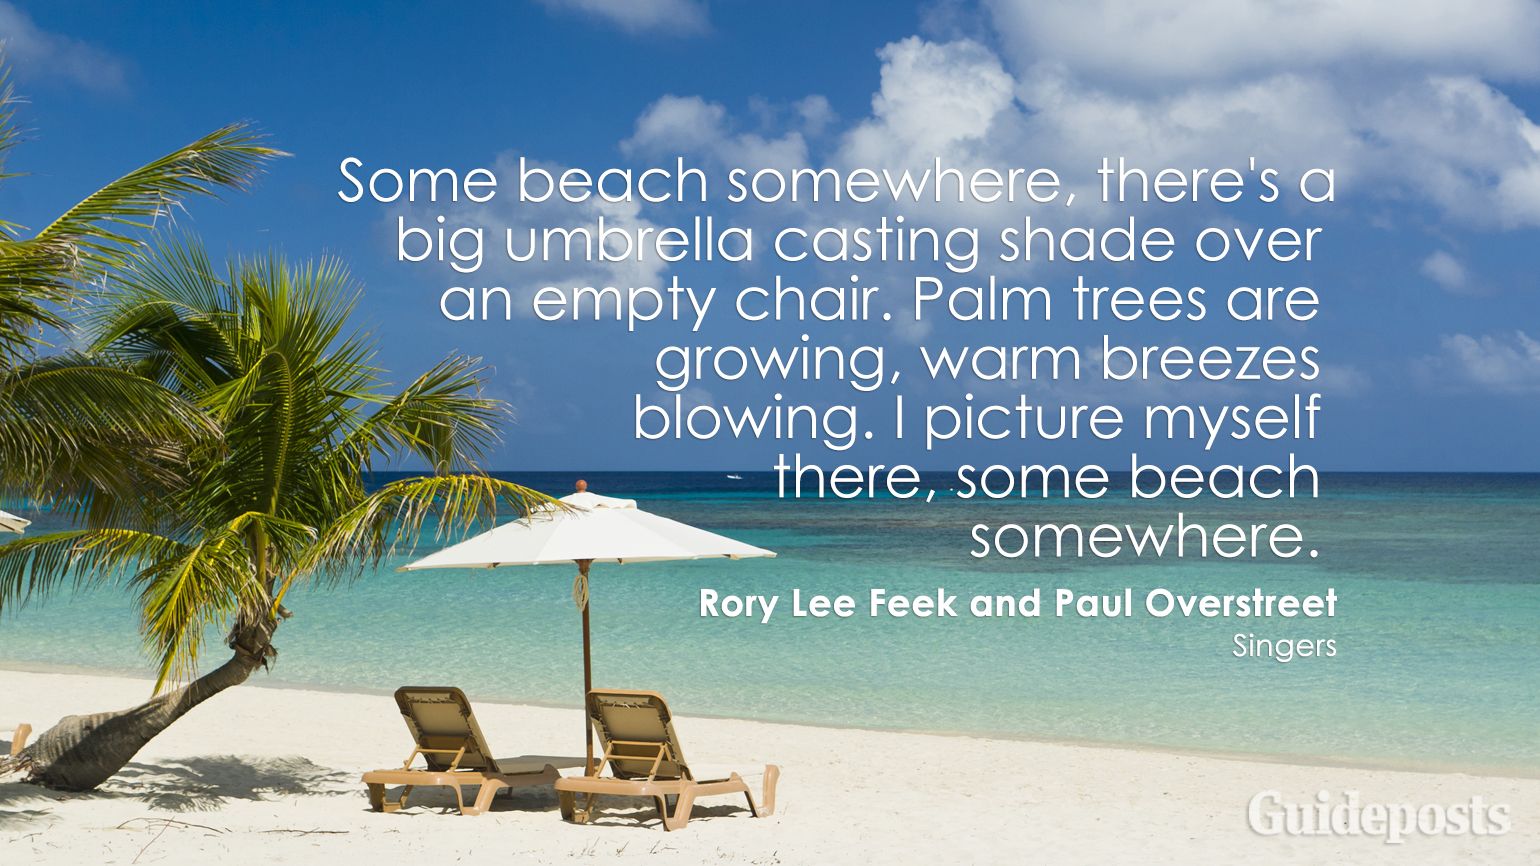 Some beach somewhere, there's a big umbrella casting shade over an empty chair. Palm trees are growing, warm breezes blowing. I picture myself there, some beach somewhere.